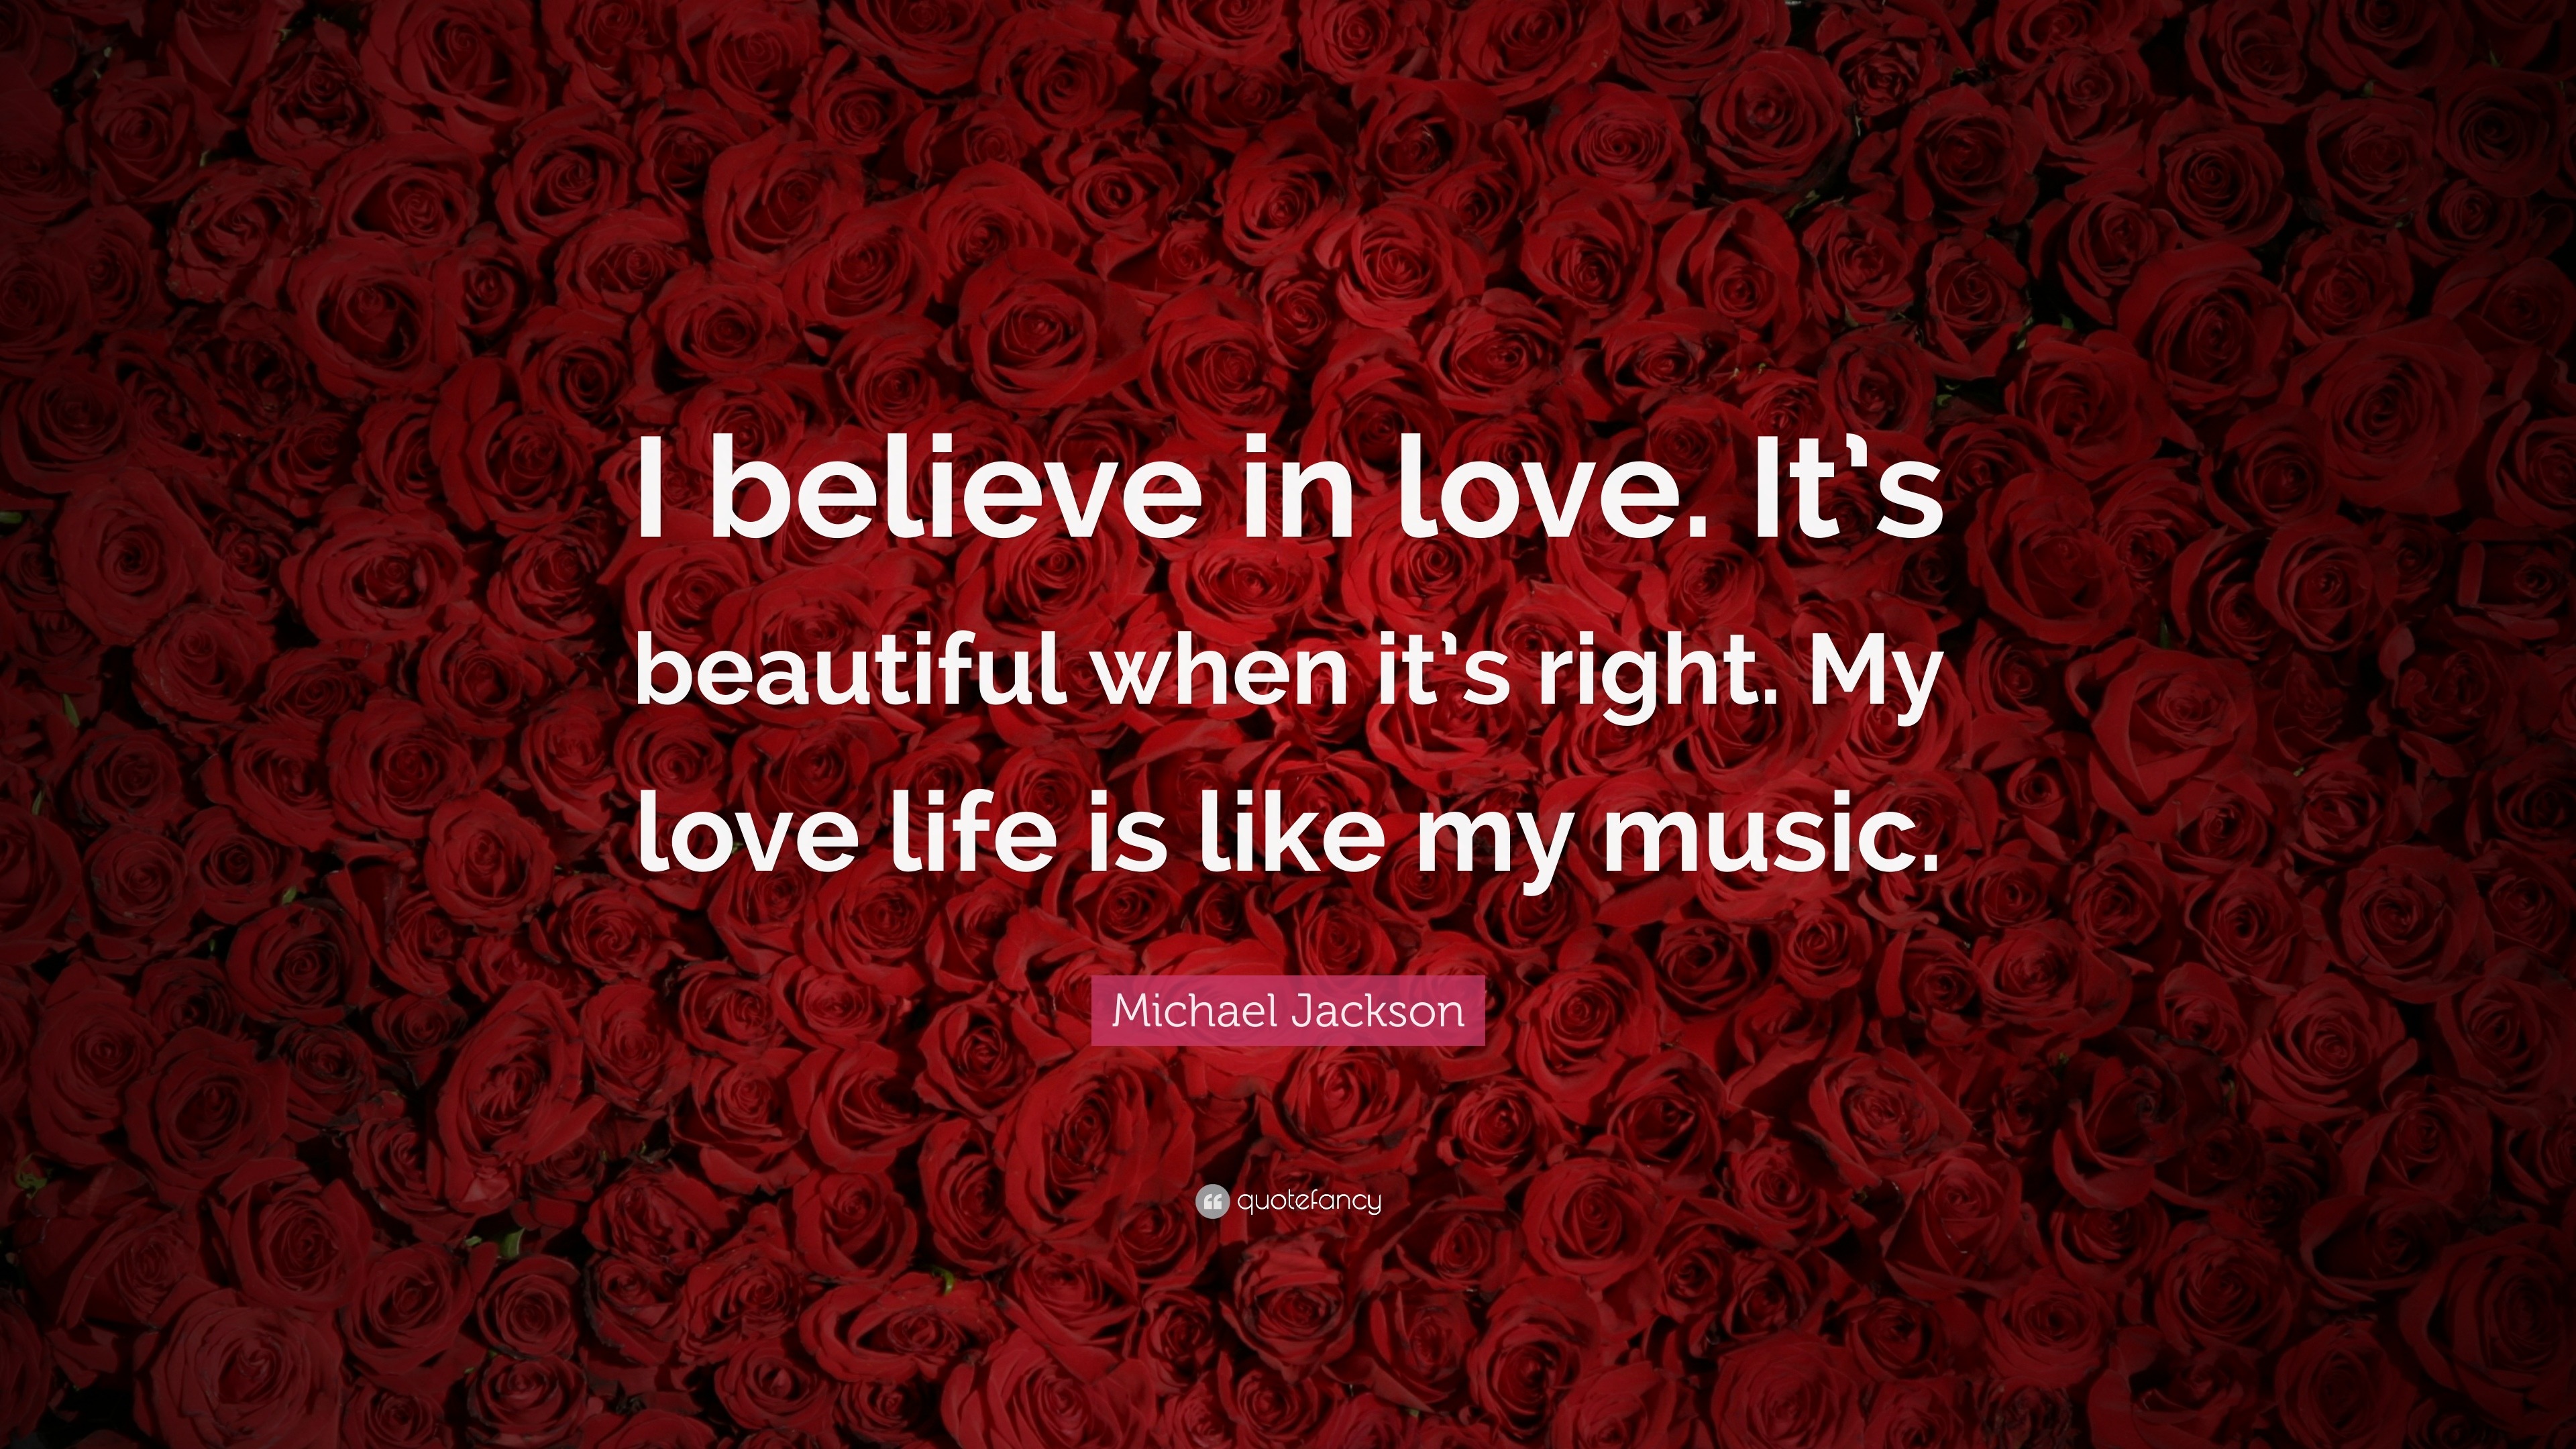 Michael Jackson Quote “I believe in love It s beautiful when it s right